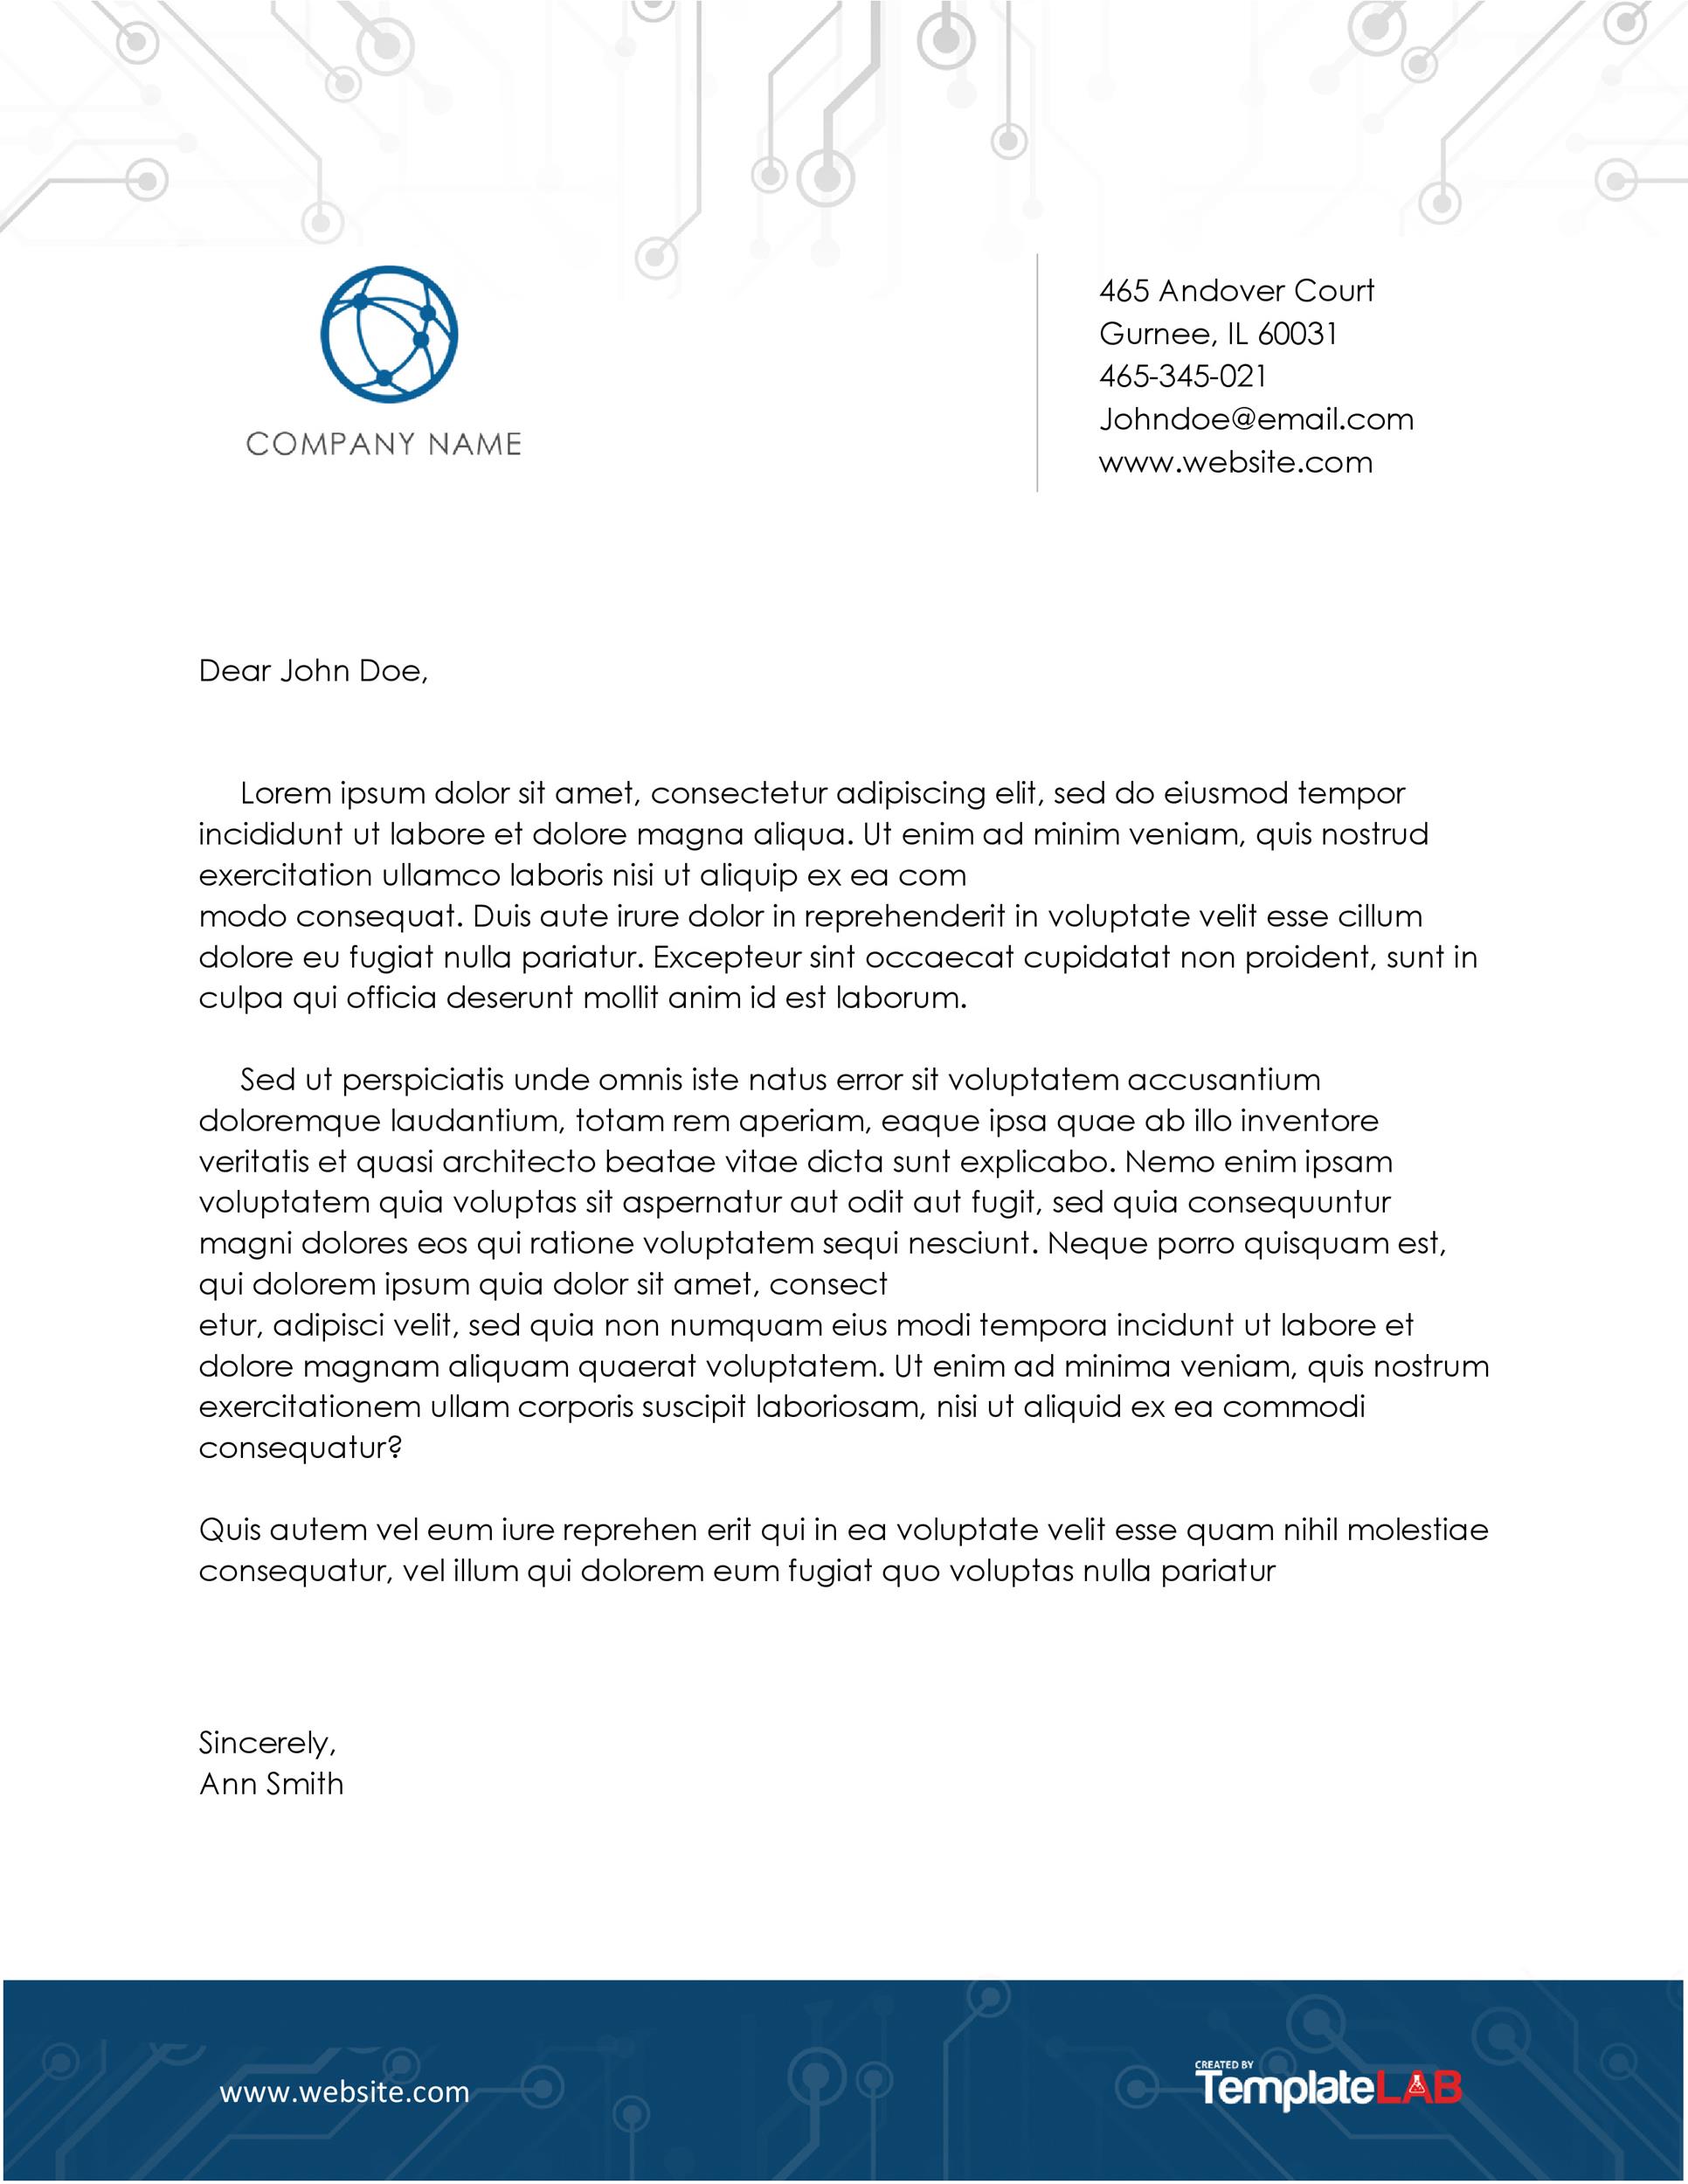 Business Letter Format With Letterhead from templatelab.com